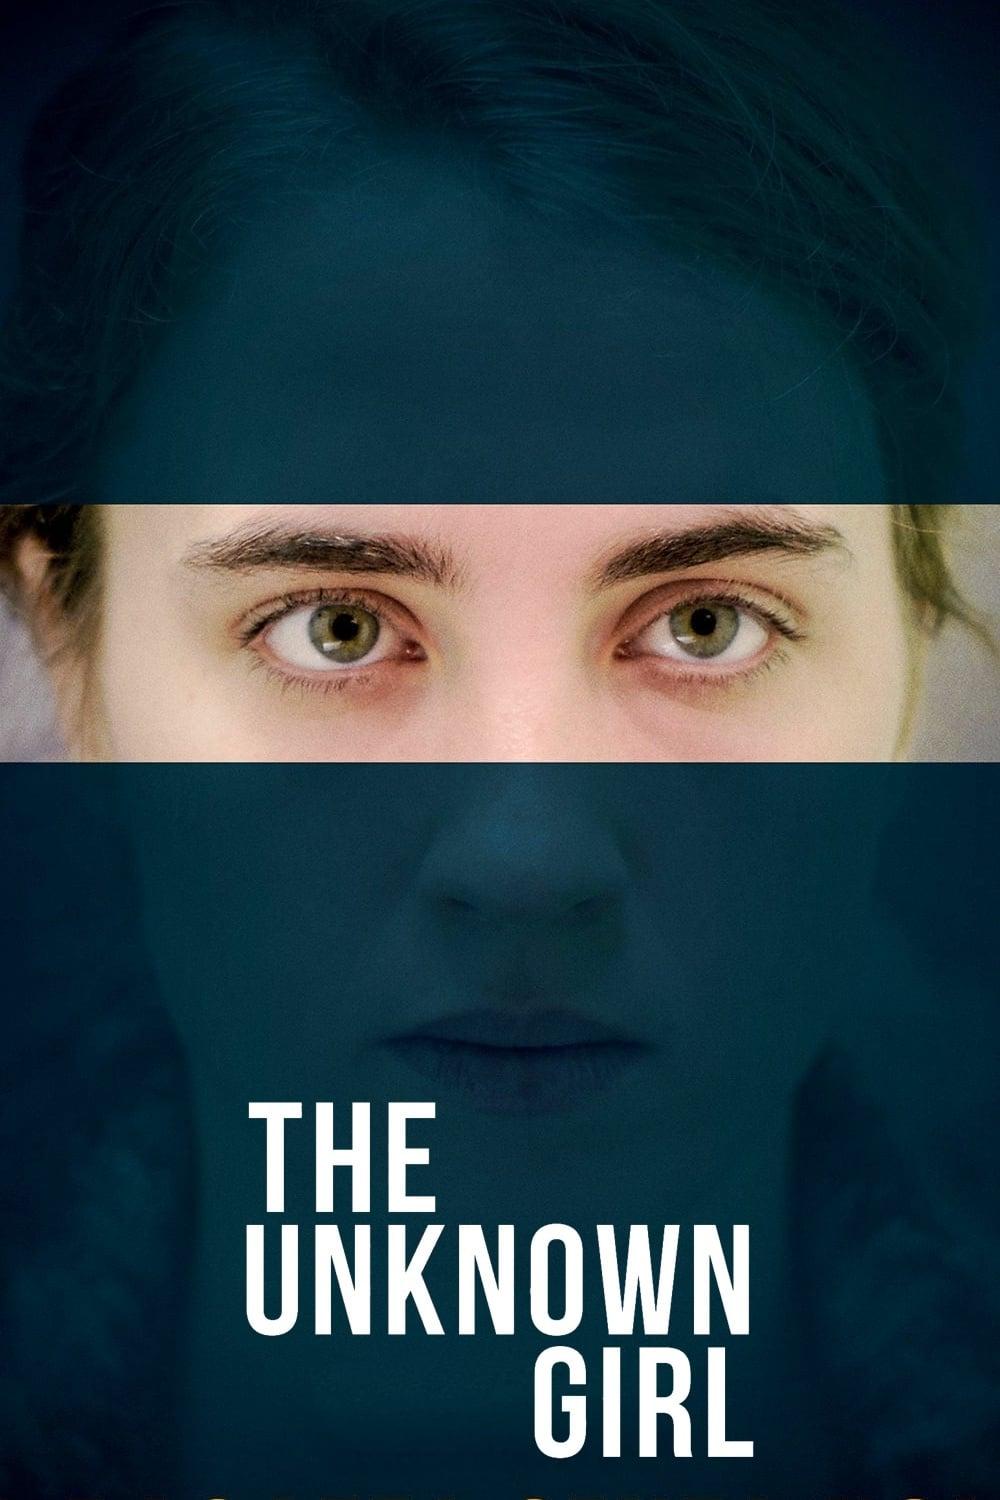 The Unknown Girl poster